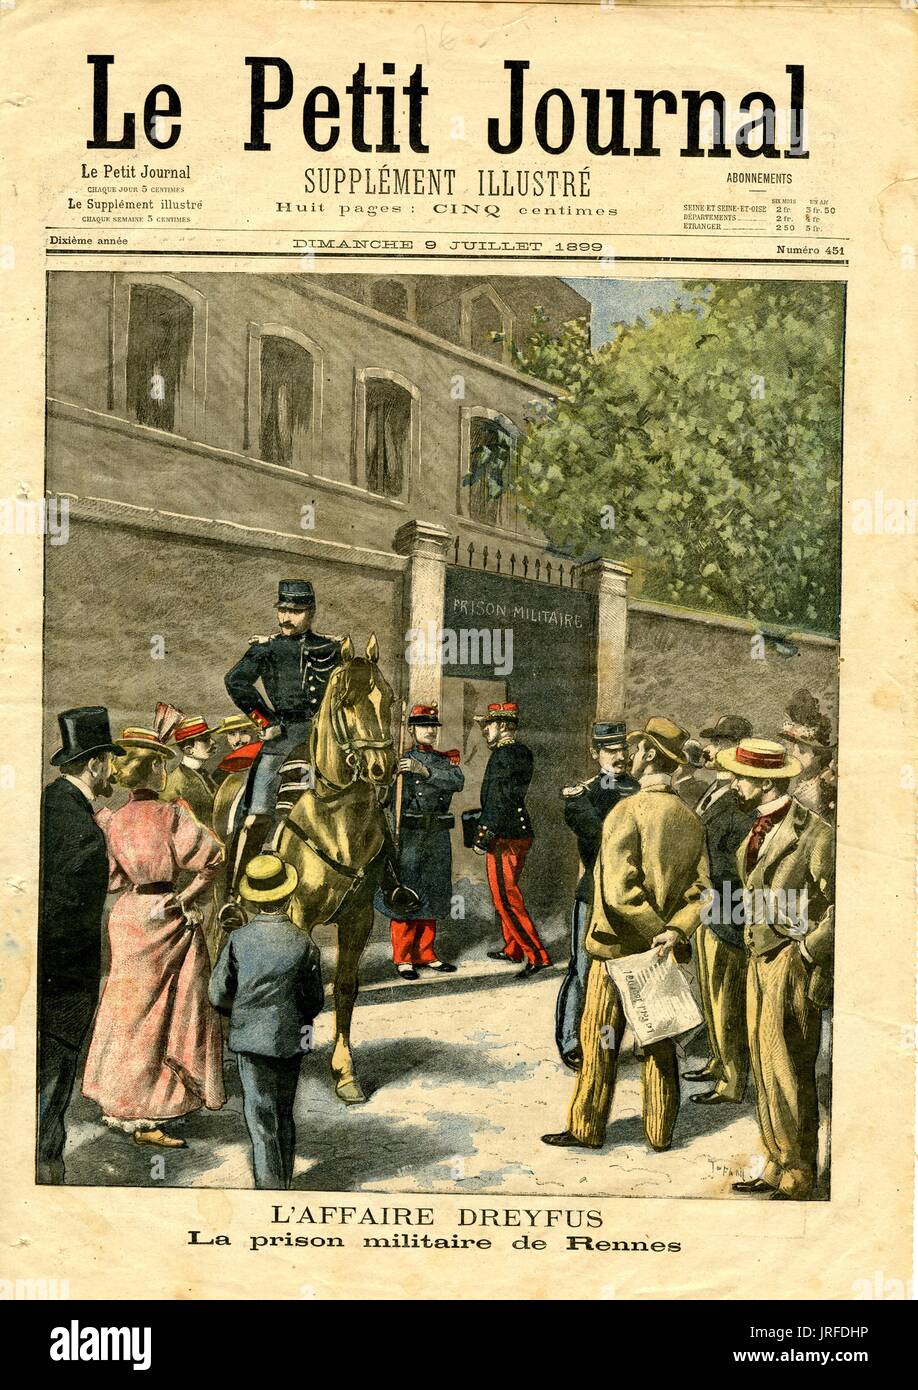 Le Petit Journal cover titled 'L'Affaire Dreyfus, La prison militaire de Rennes', number 451, townspeople are standing outside of the military prison of Rennes, a man of the military is sitting on a horse, 1899. Stock Photo